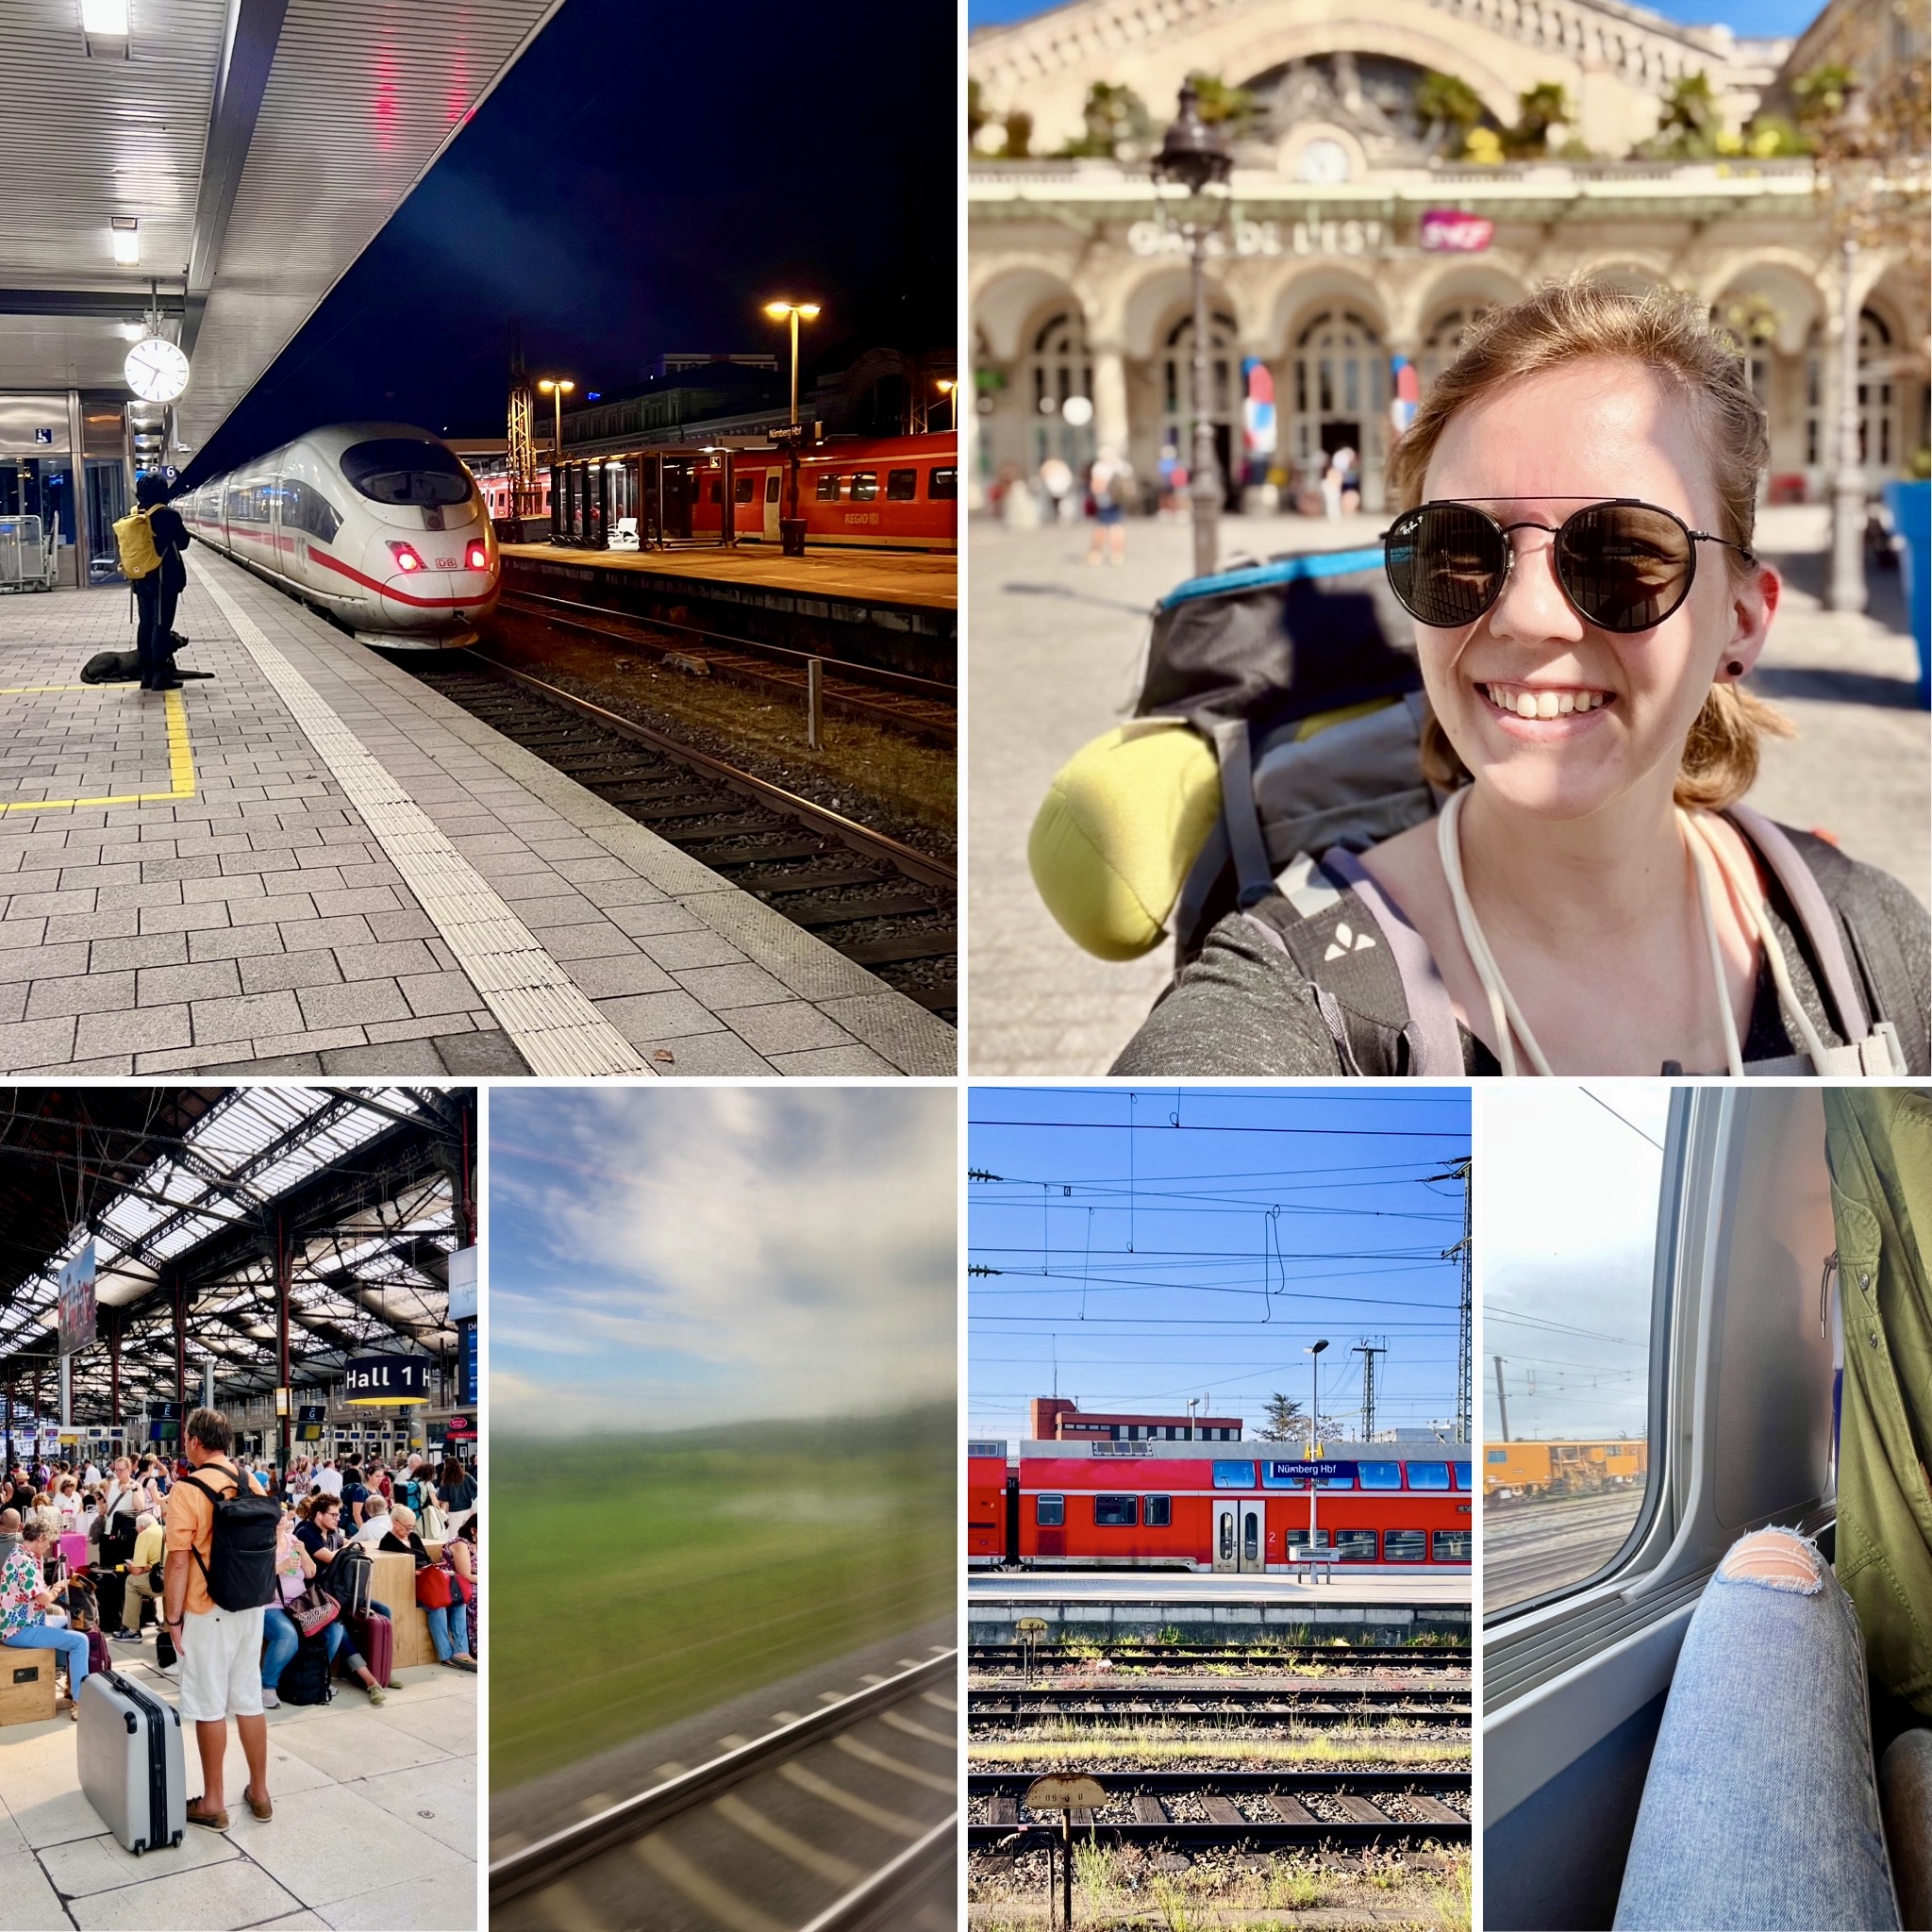 Collage of six pictures. 1: train station in Nuremberg, it’s still dark and a train is waiting at the station. One person is waiting next to the train. 2: Feli with a backpack, smiling with sunglasses in front of Gare de l’est in Paris. 3: A very crowded train station in Paris, all waiting. 4: A blurred view out the train window with green landscape in the background. 5: A red train in the sun at Nuremberg central station. 6: Feli sits on the seat in a train with a window next to her and her jacket hanging above her legs.